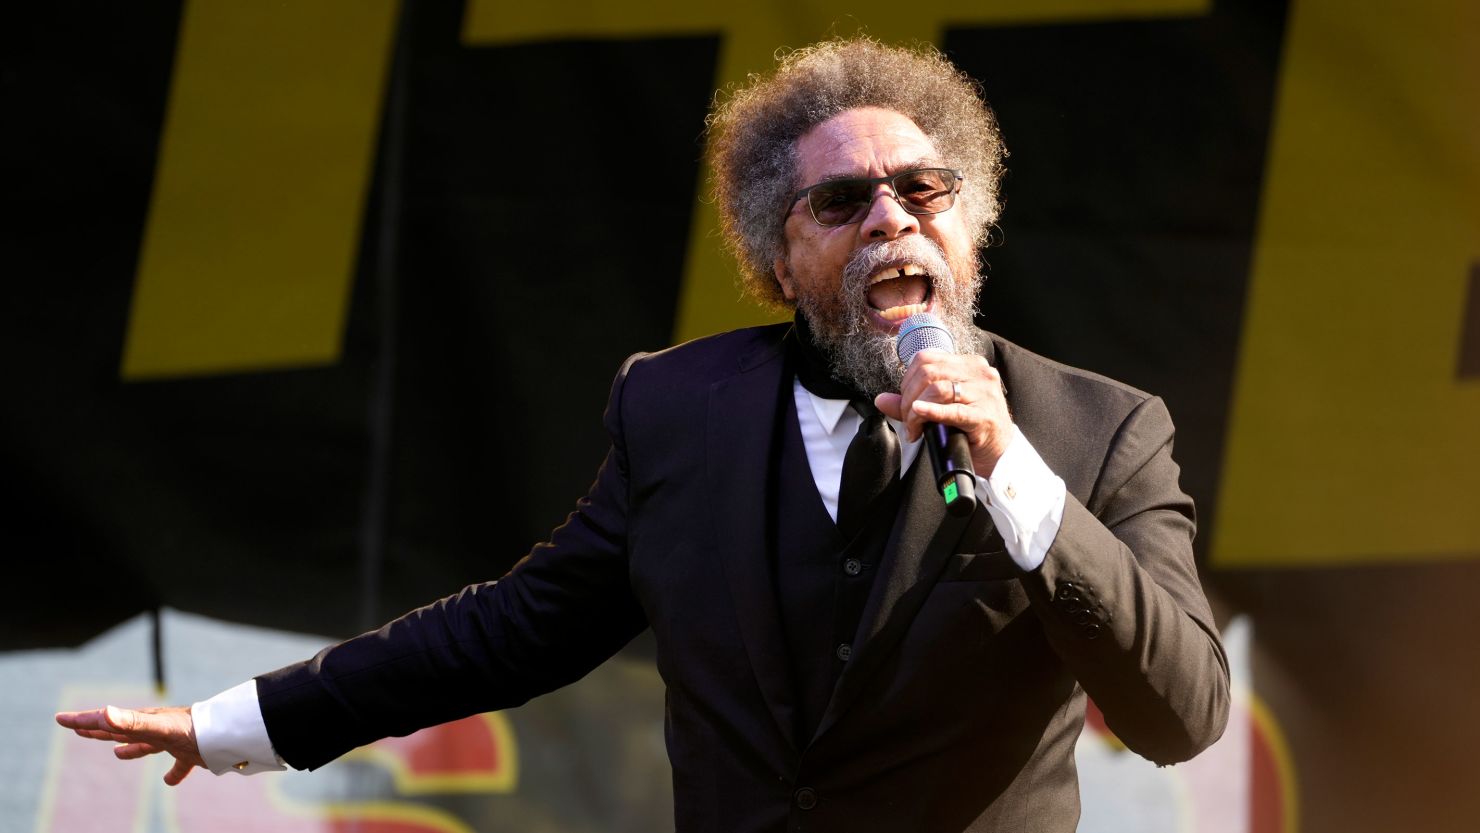 Scholar and activist Dr. Cornel West, who is running for U.S. president as a third-party candidate in 2024, gives the keynote address at the "#BLM Turns 10 People's Justice Festival" on Saturday, July 15, 2023, at the Leimert Park neighborhood in Los Angeles.